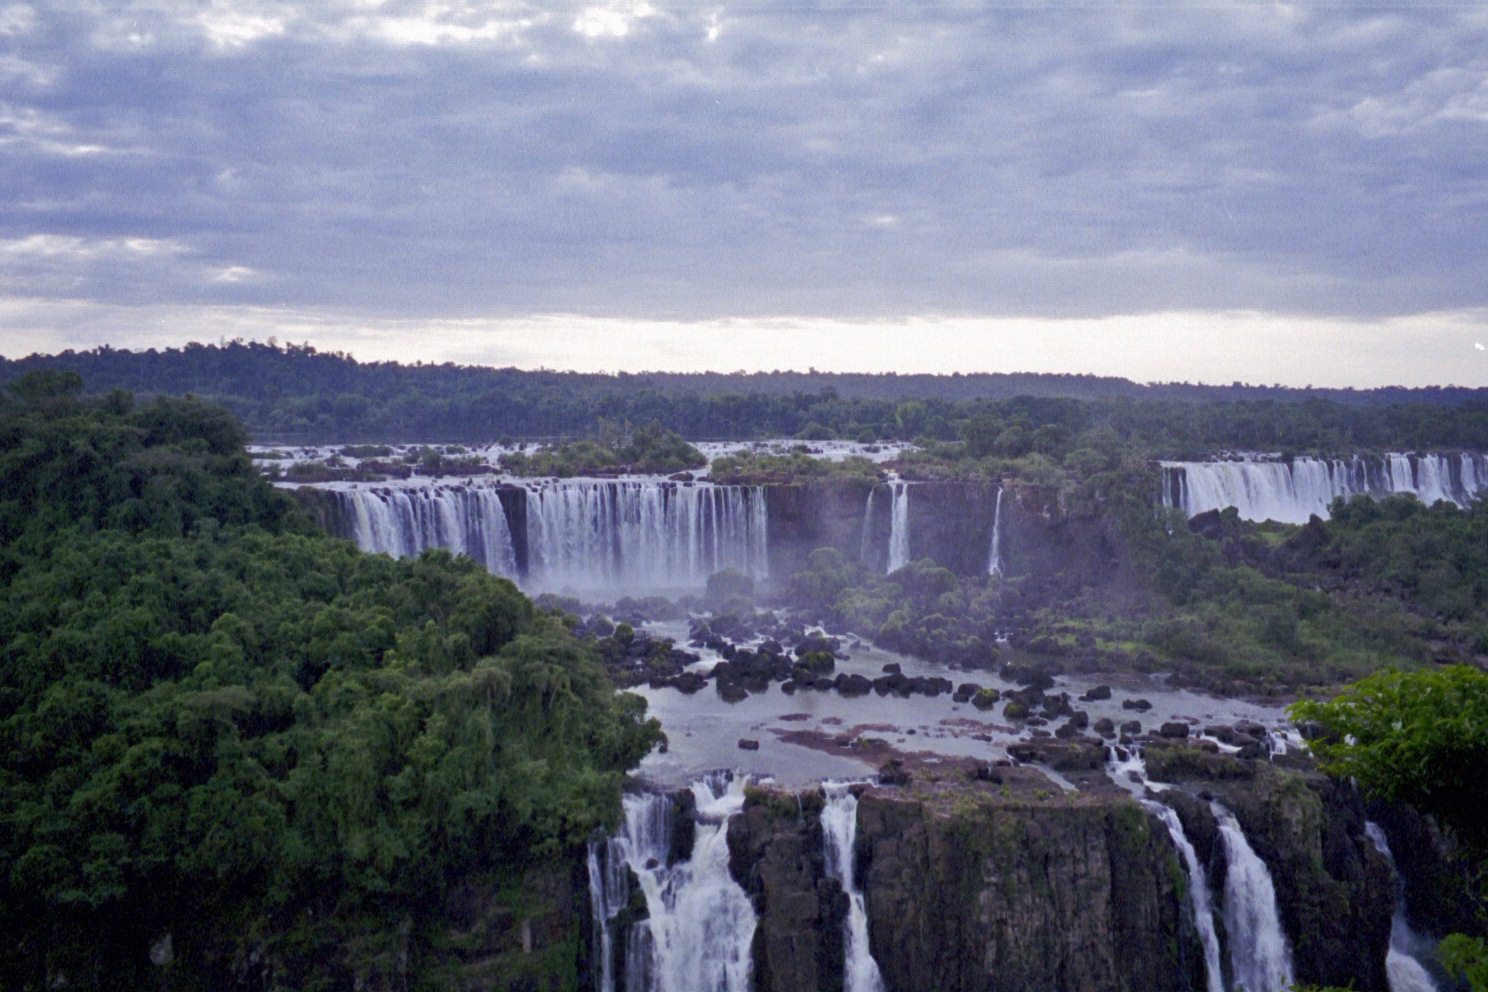 Foz do Iguaçu, Brazil (note: this image is not suitable for large prints)